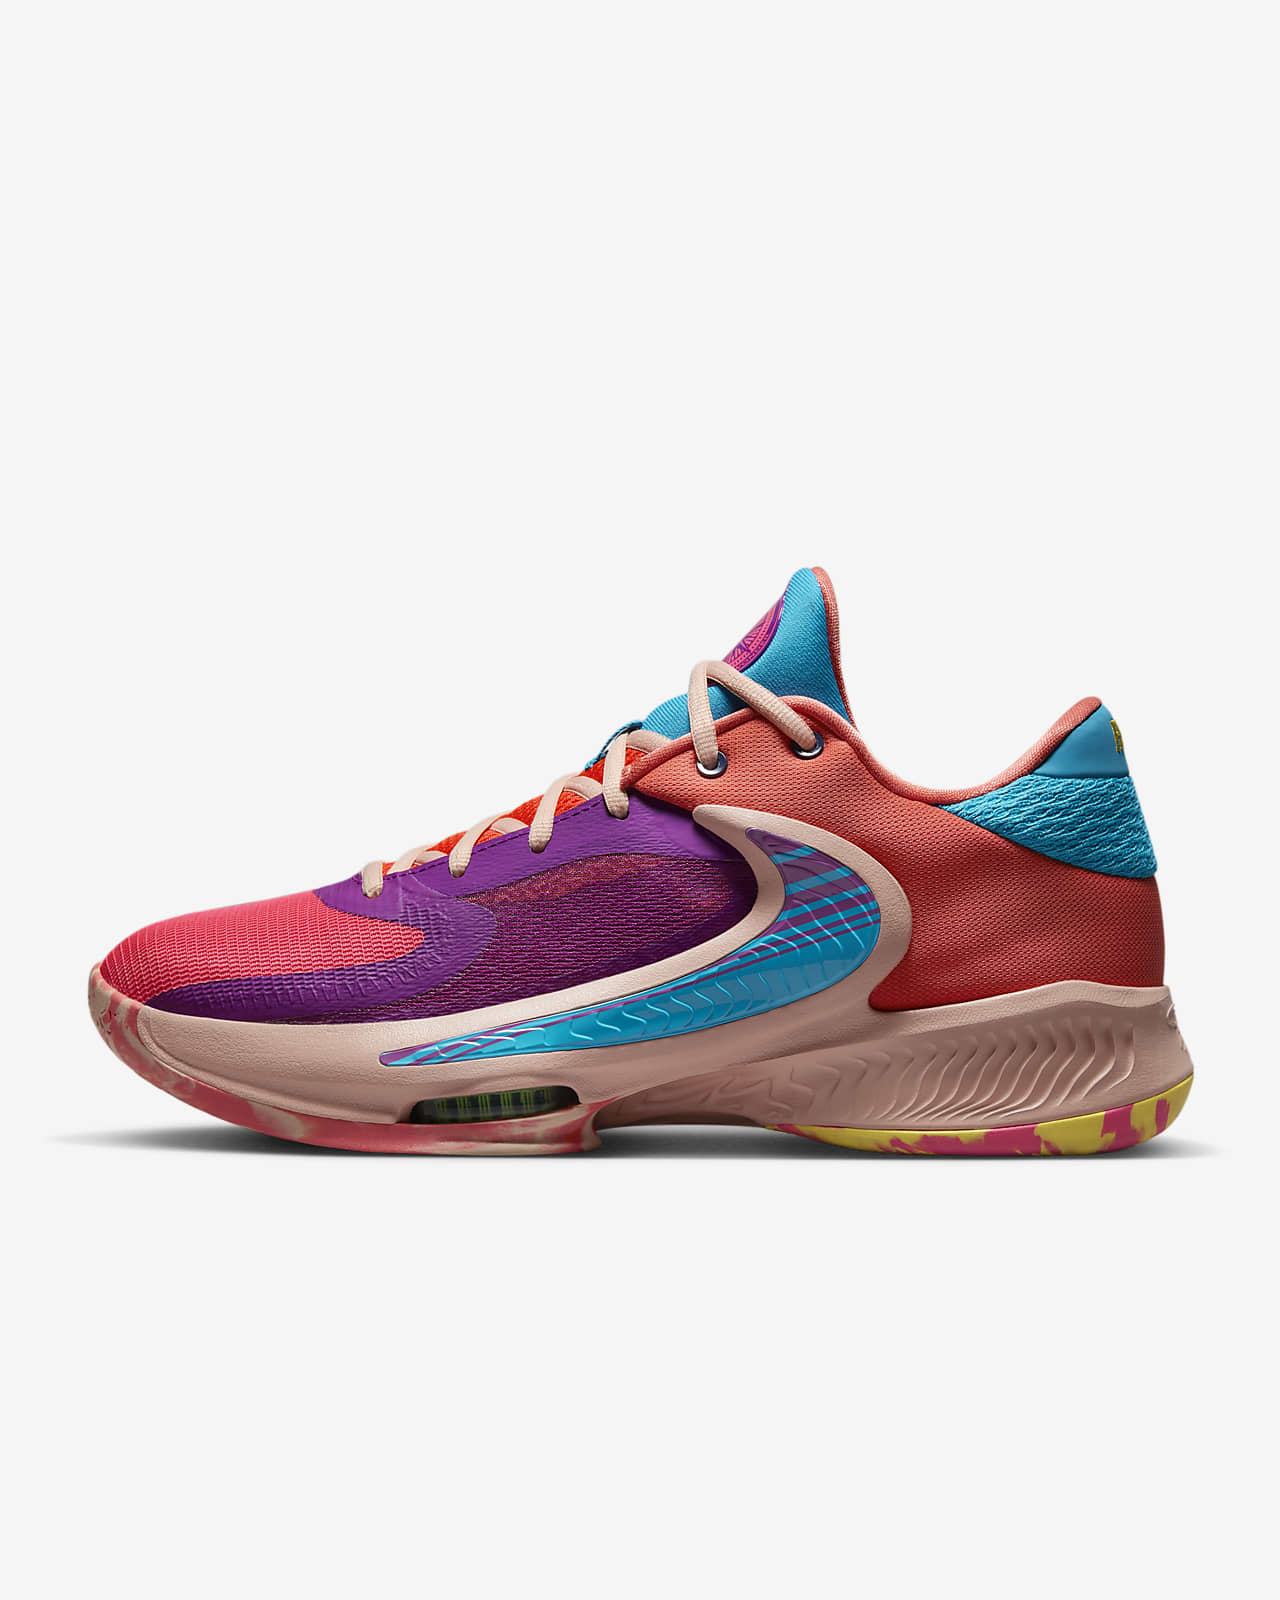 zoom-freak-4-basketball-shoes-S9DKg0.png